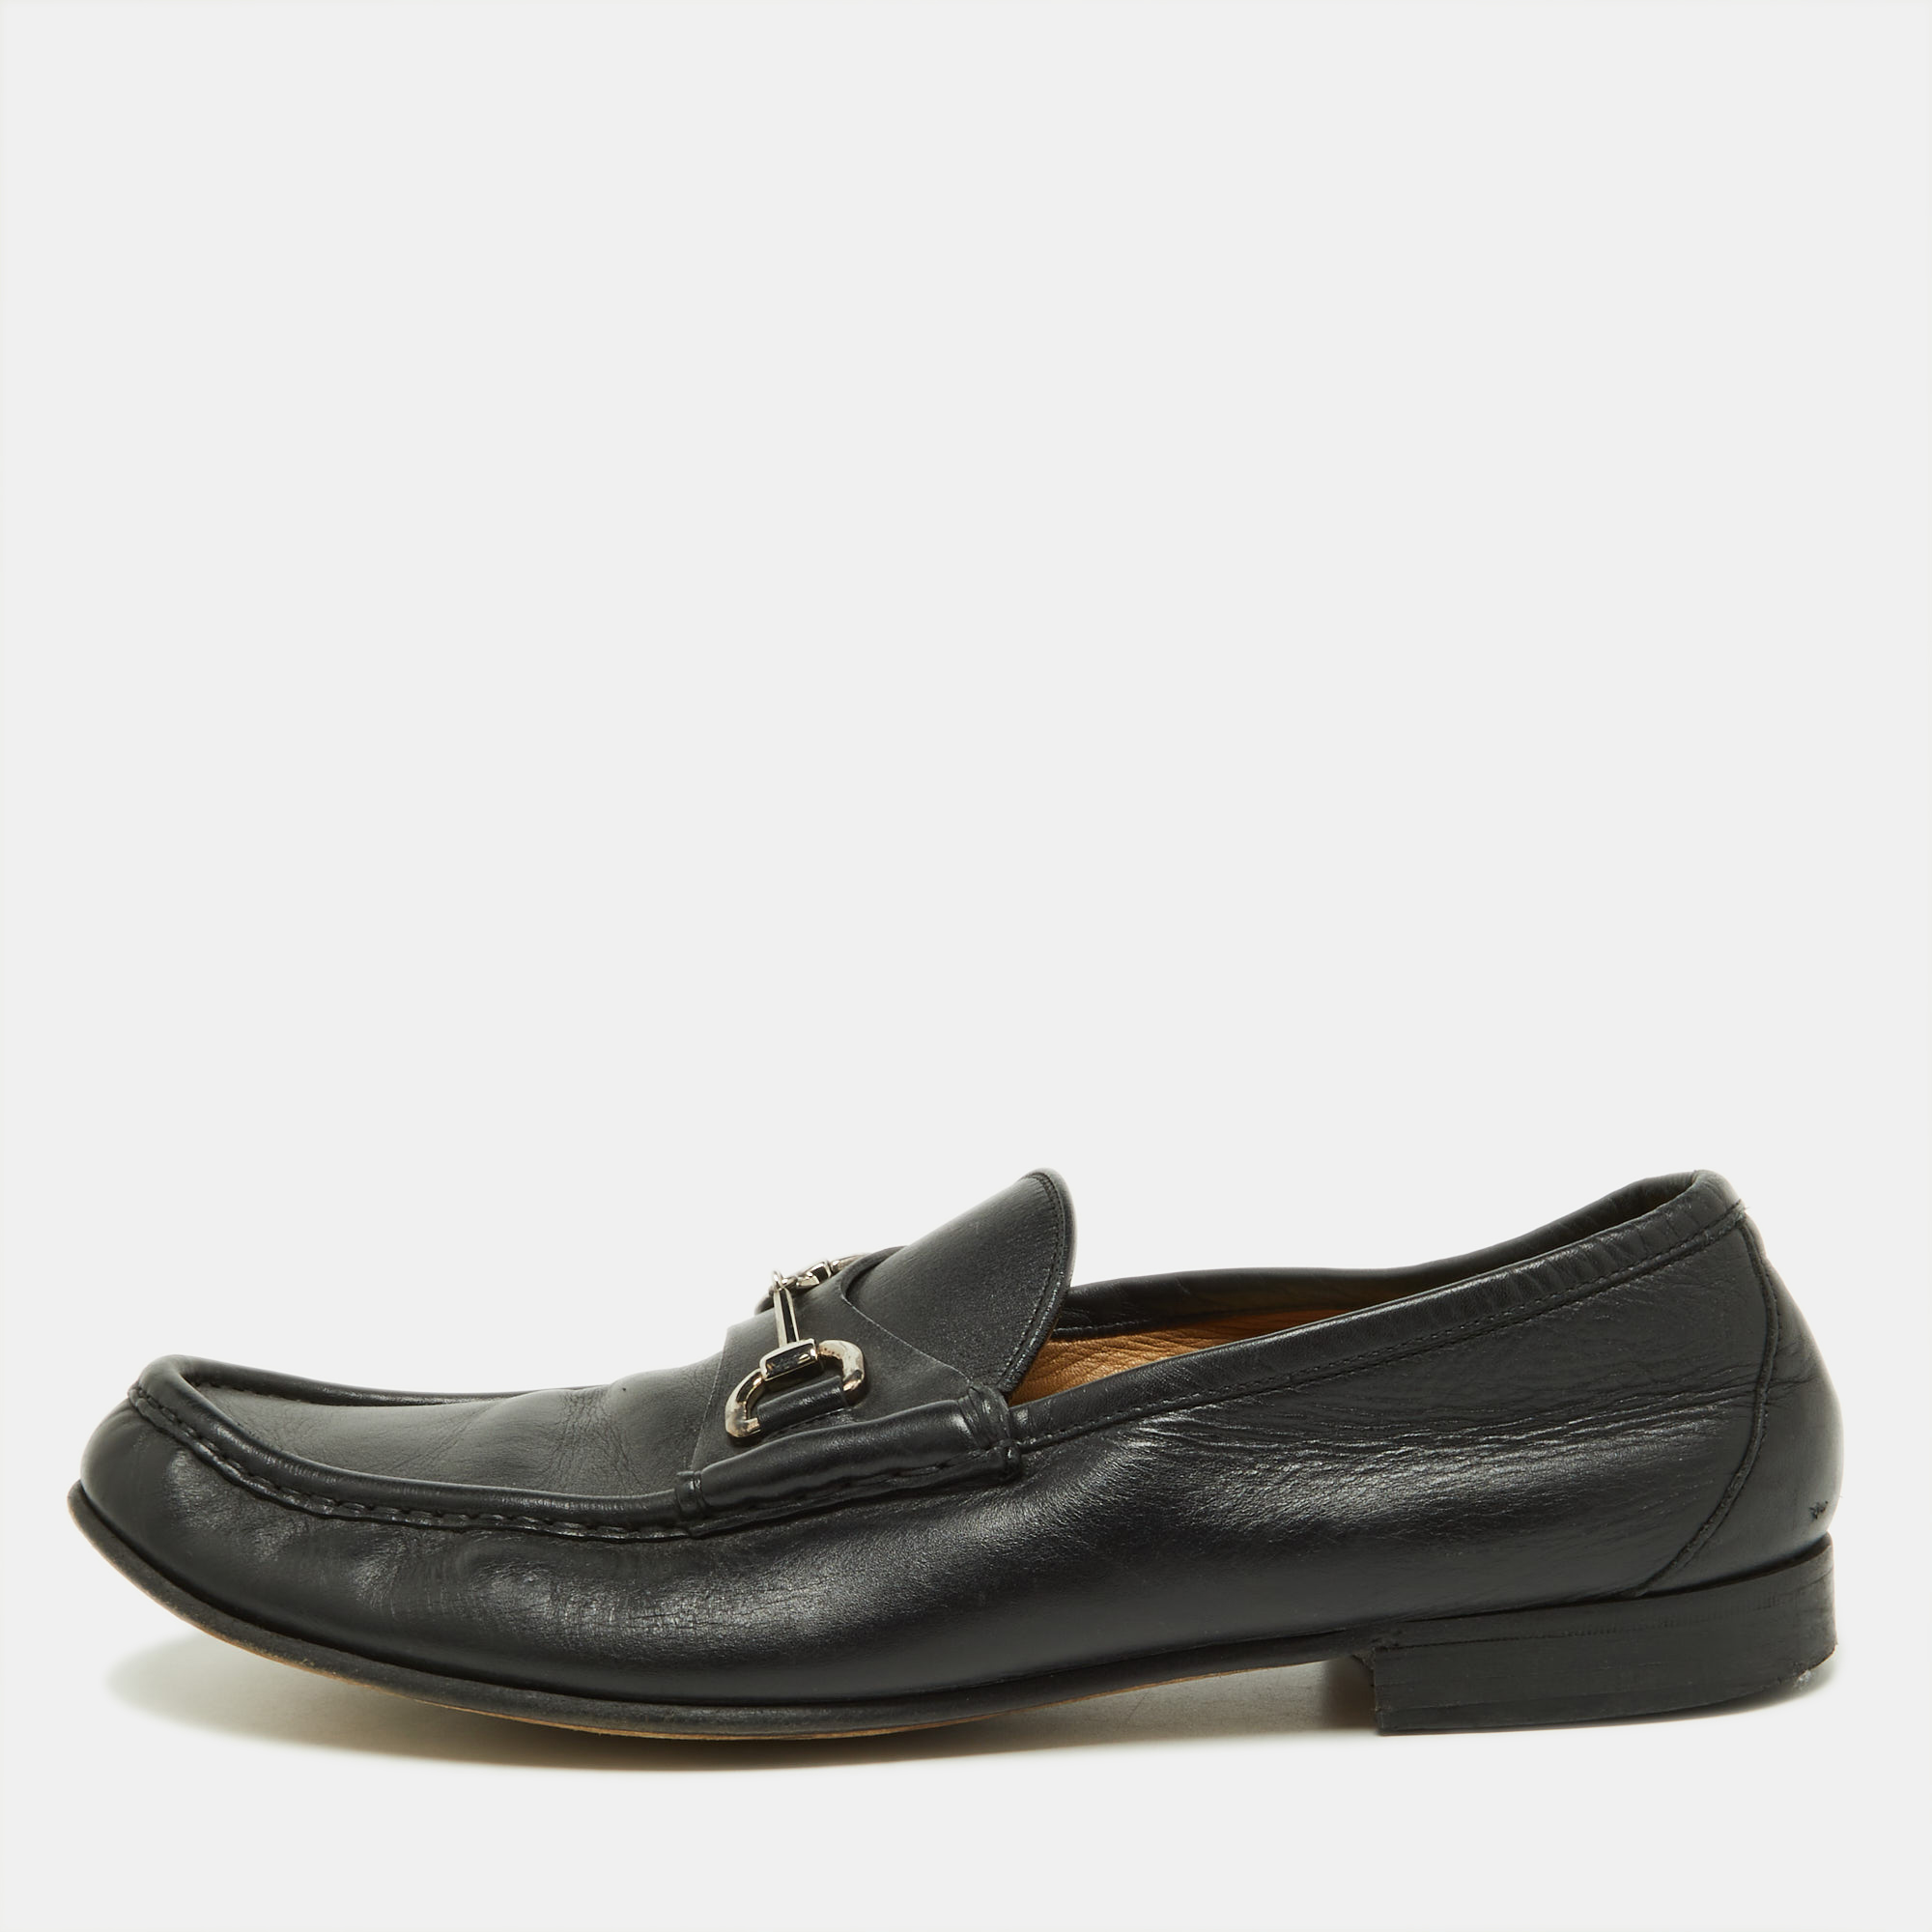 Gucci Black Leather Horsebit Loafers Size 44